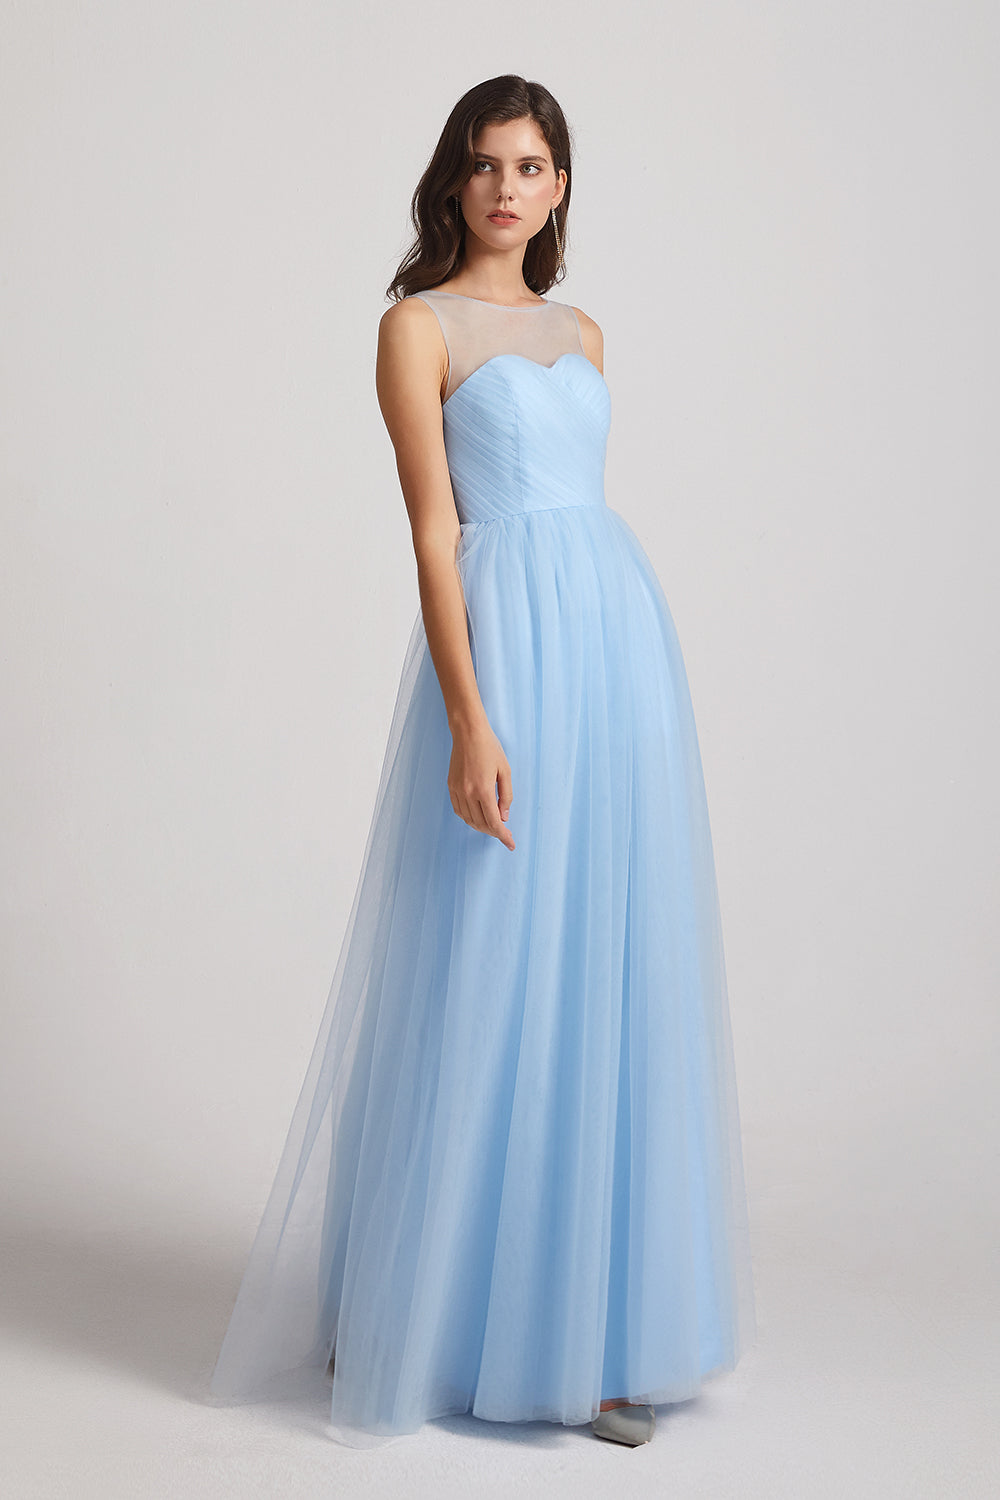 tulle gown for wedding party